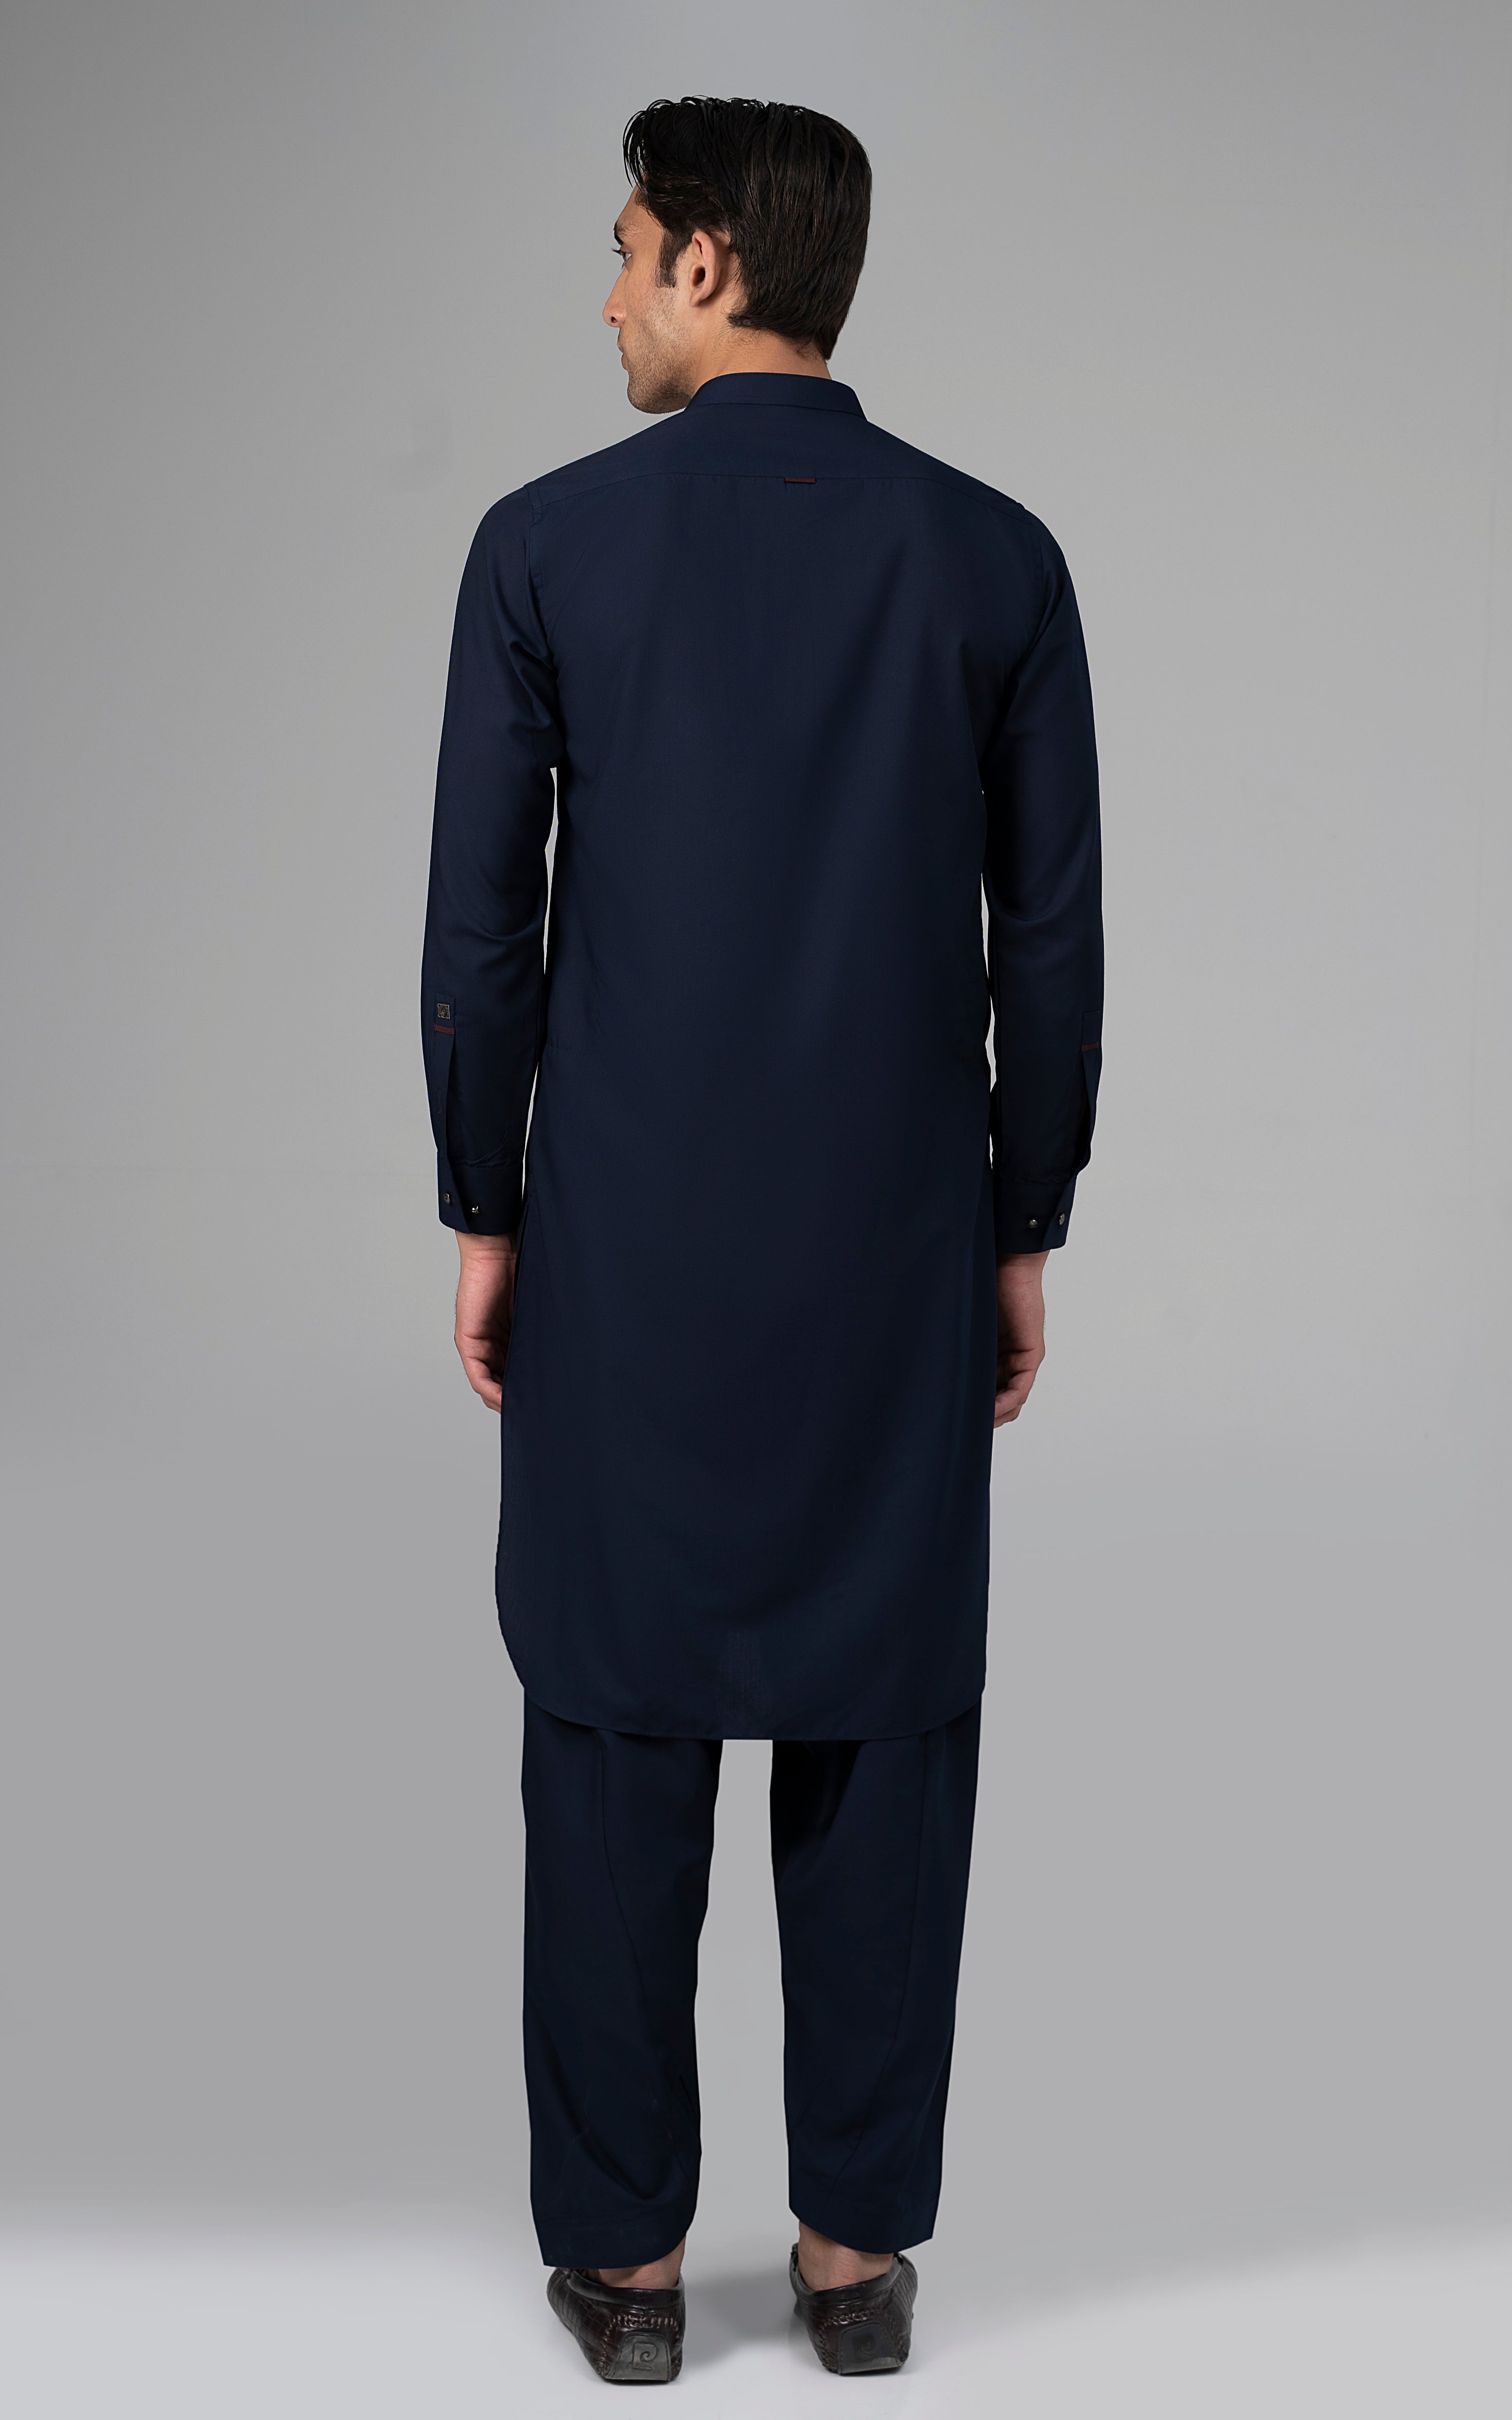 TEXTURED BLENDED WASH & WEAR - SIGNATURE COLLECTION NAVY